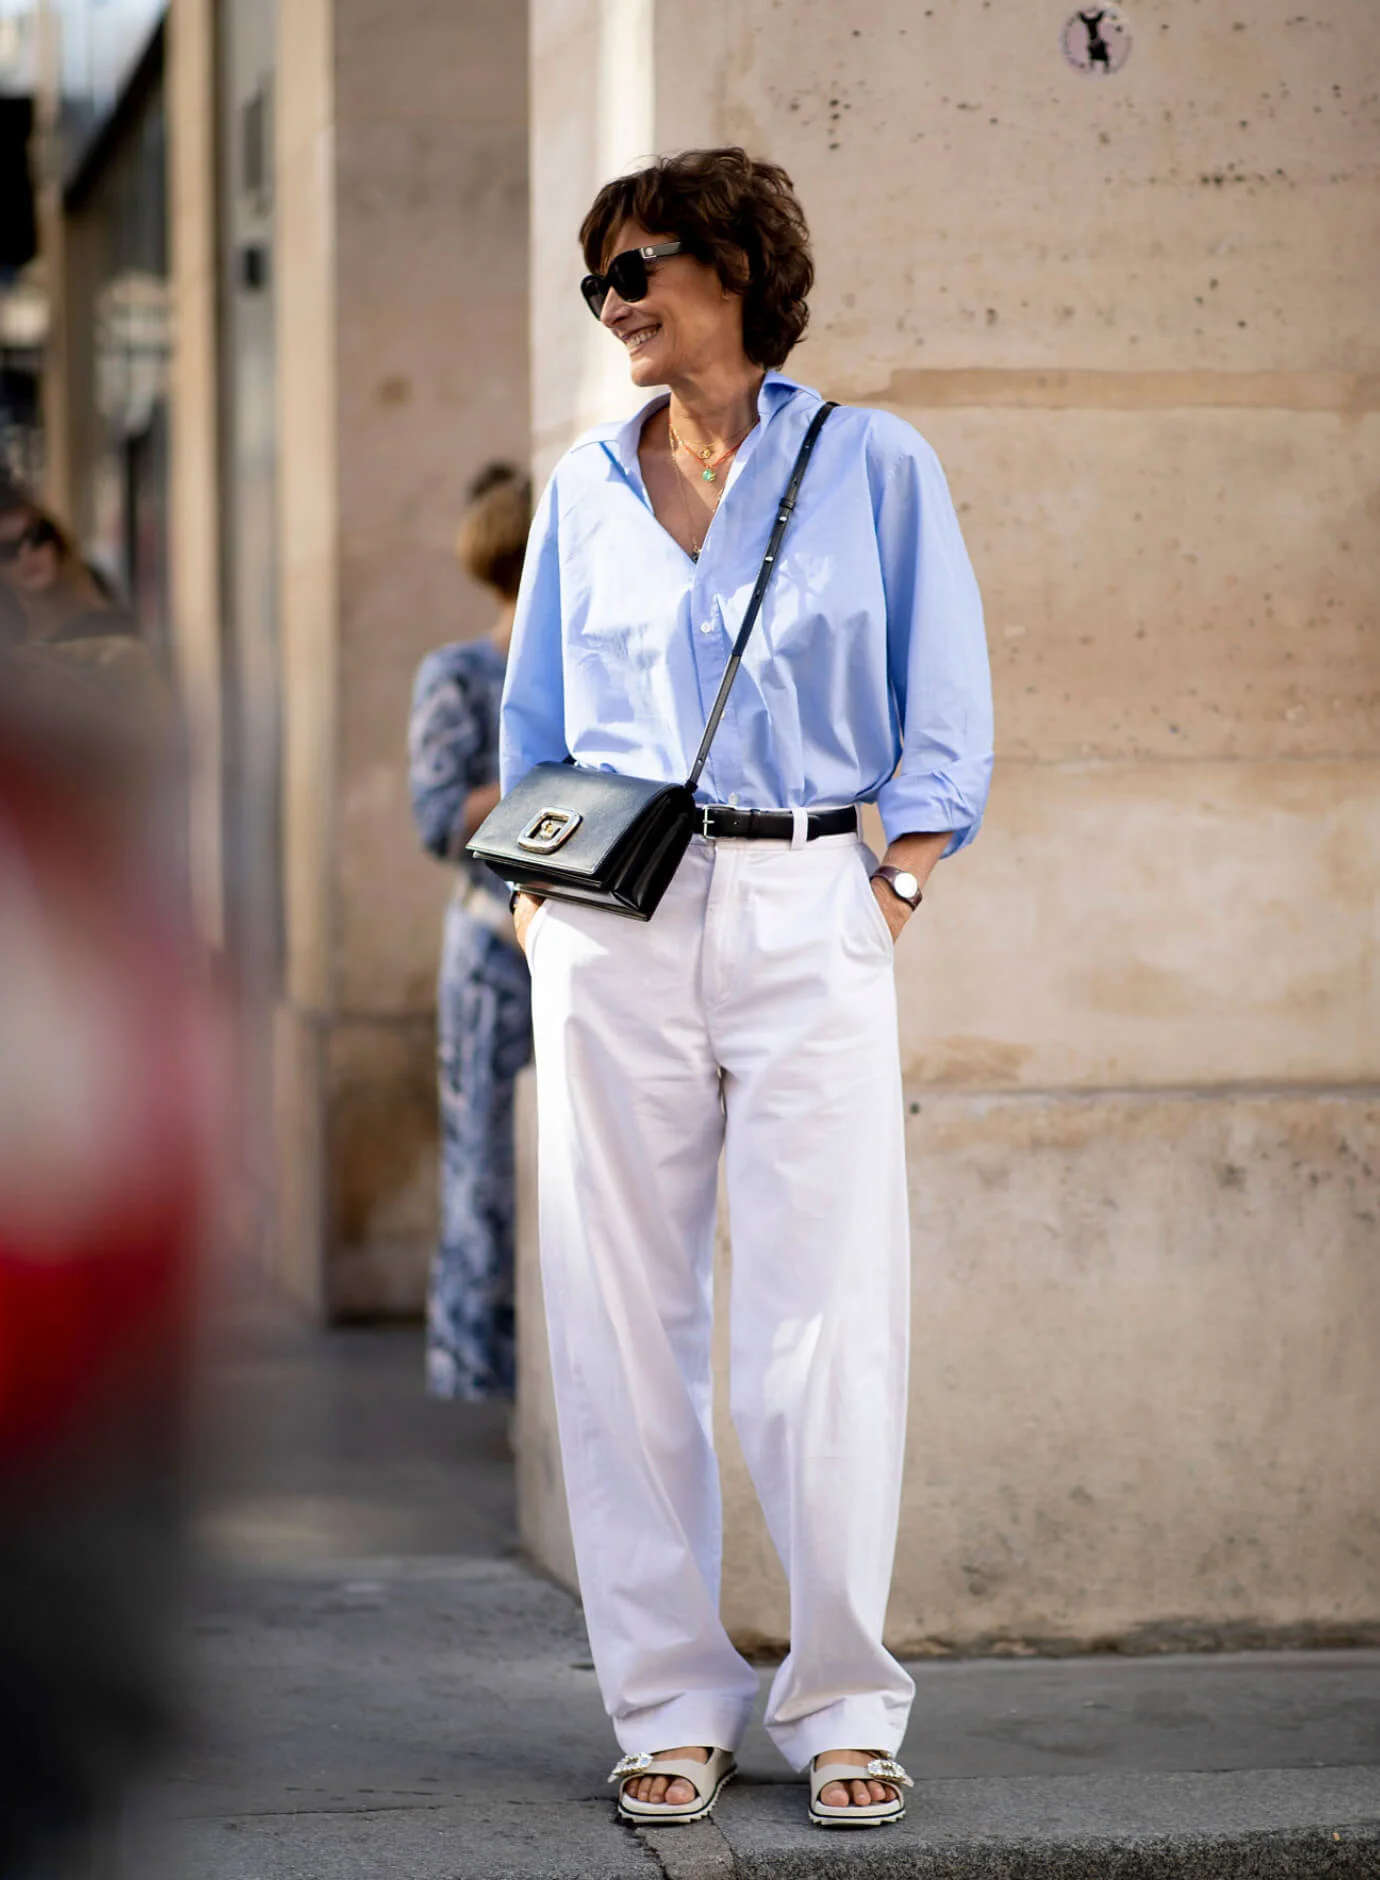 The Most Comprehensive Guide To French Style By A French Woman